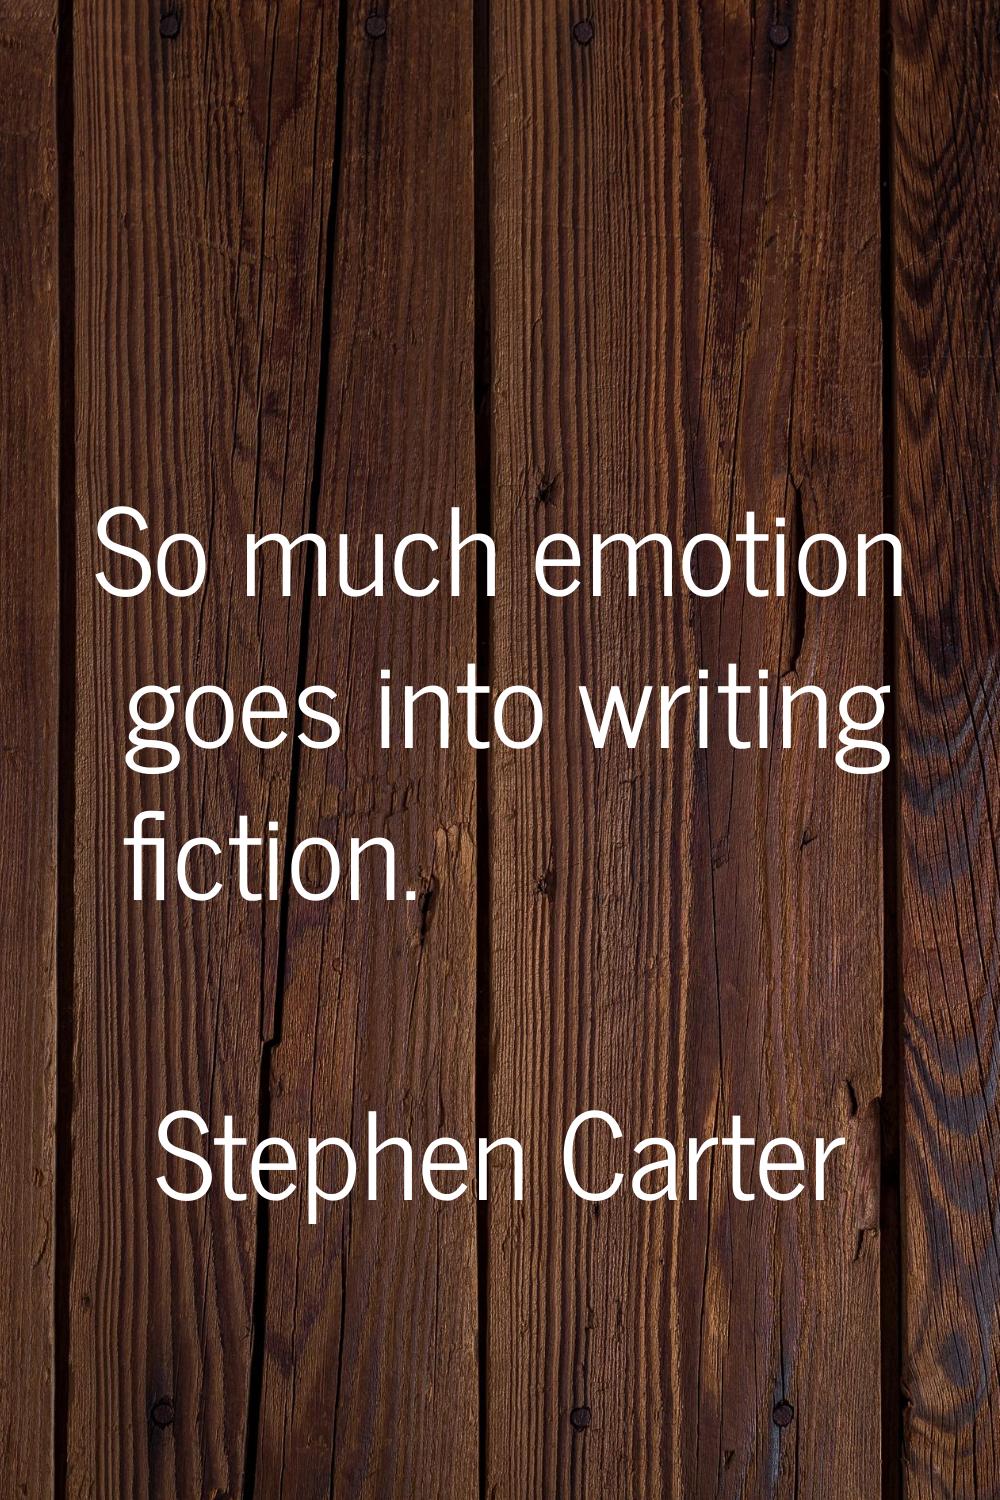 So much emotion goes into writing fiction.